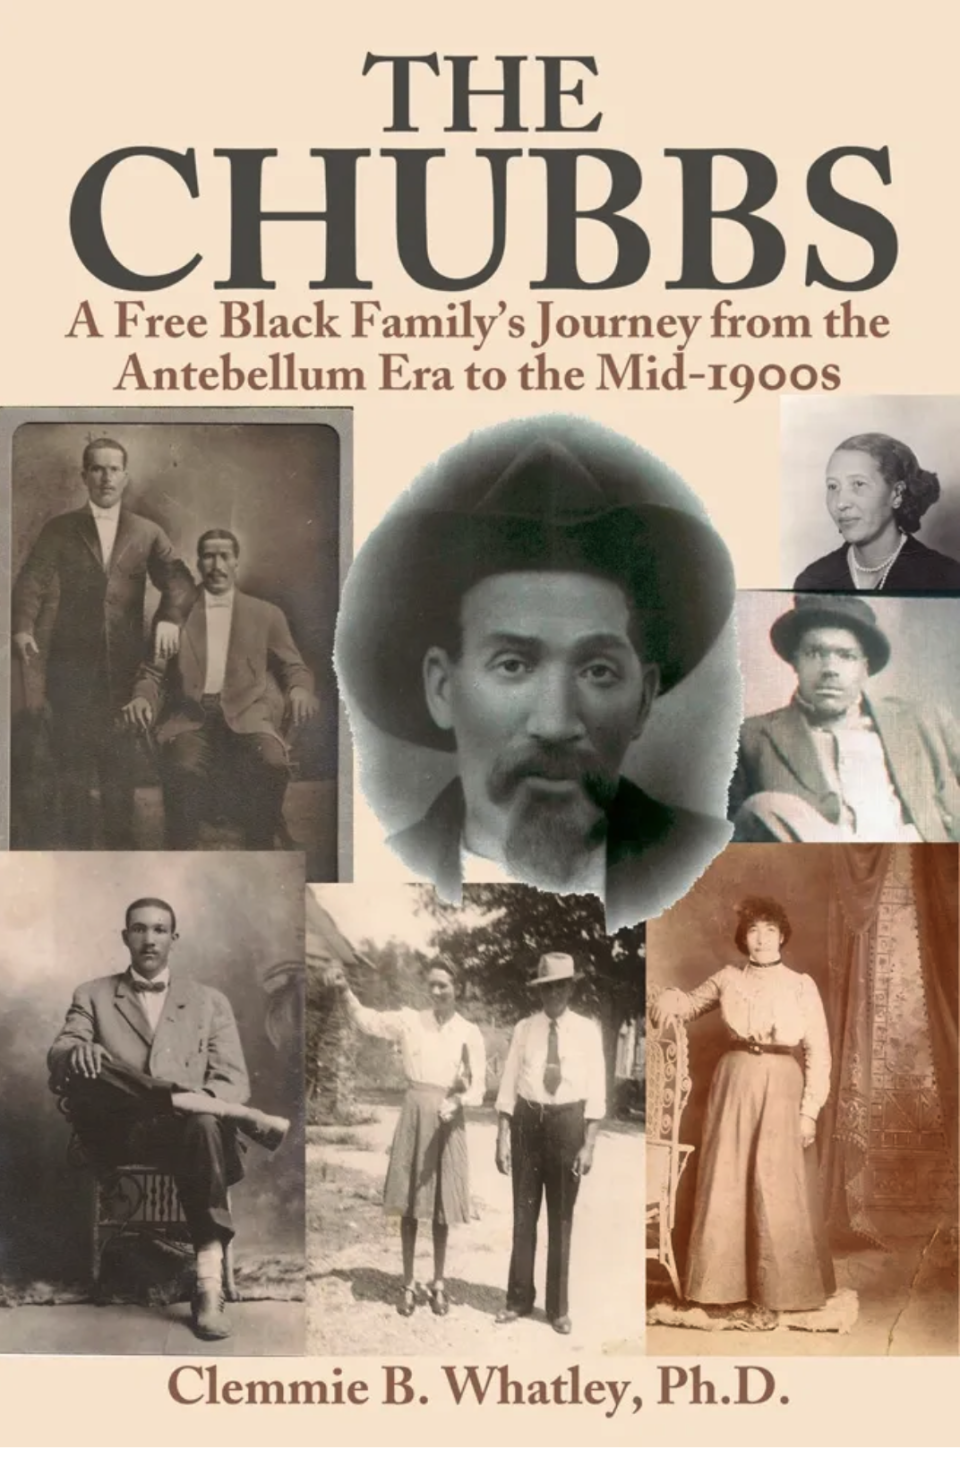 Clemmie B. Whatley wrote this book on her family's history, publishing it in 2020.